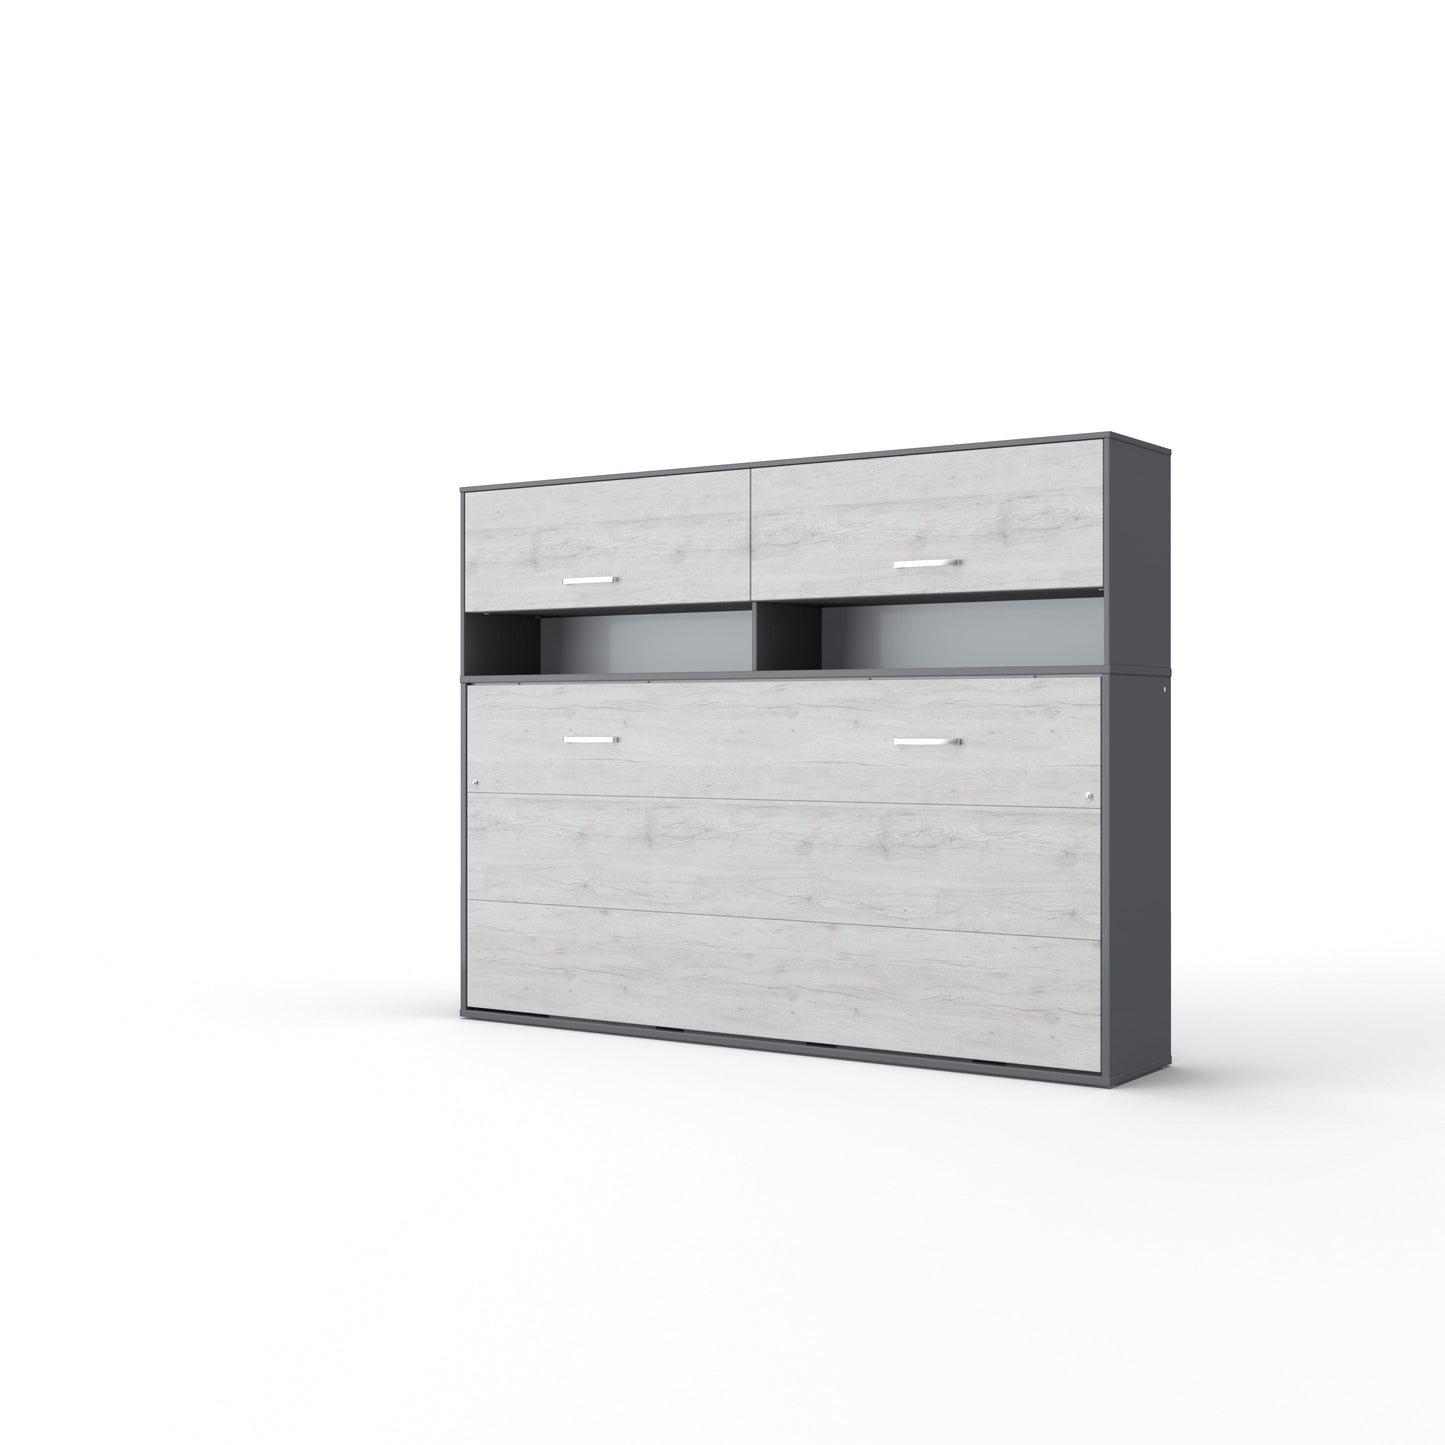 Maxima House Maxima House Invento Horizontal Wall Bed, European Full Size with a cabinet on top Grey/White Monaco IN120H-11GW